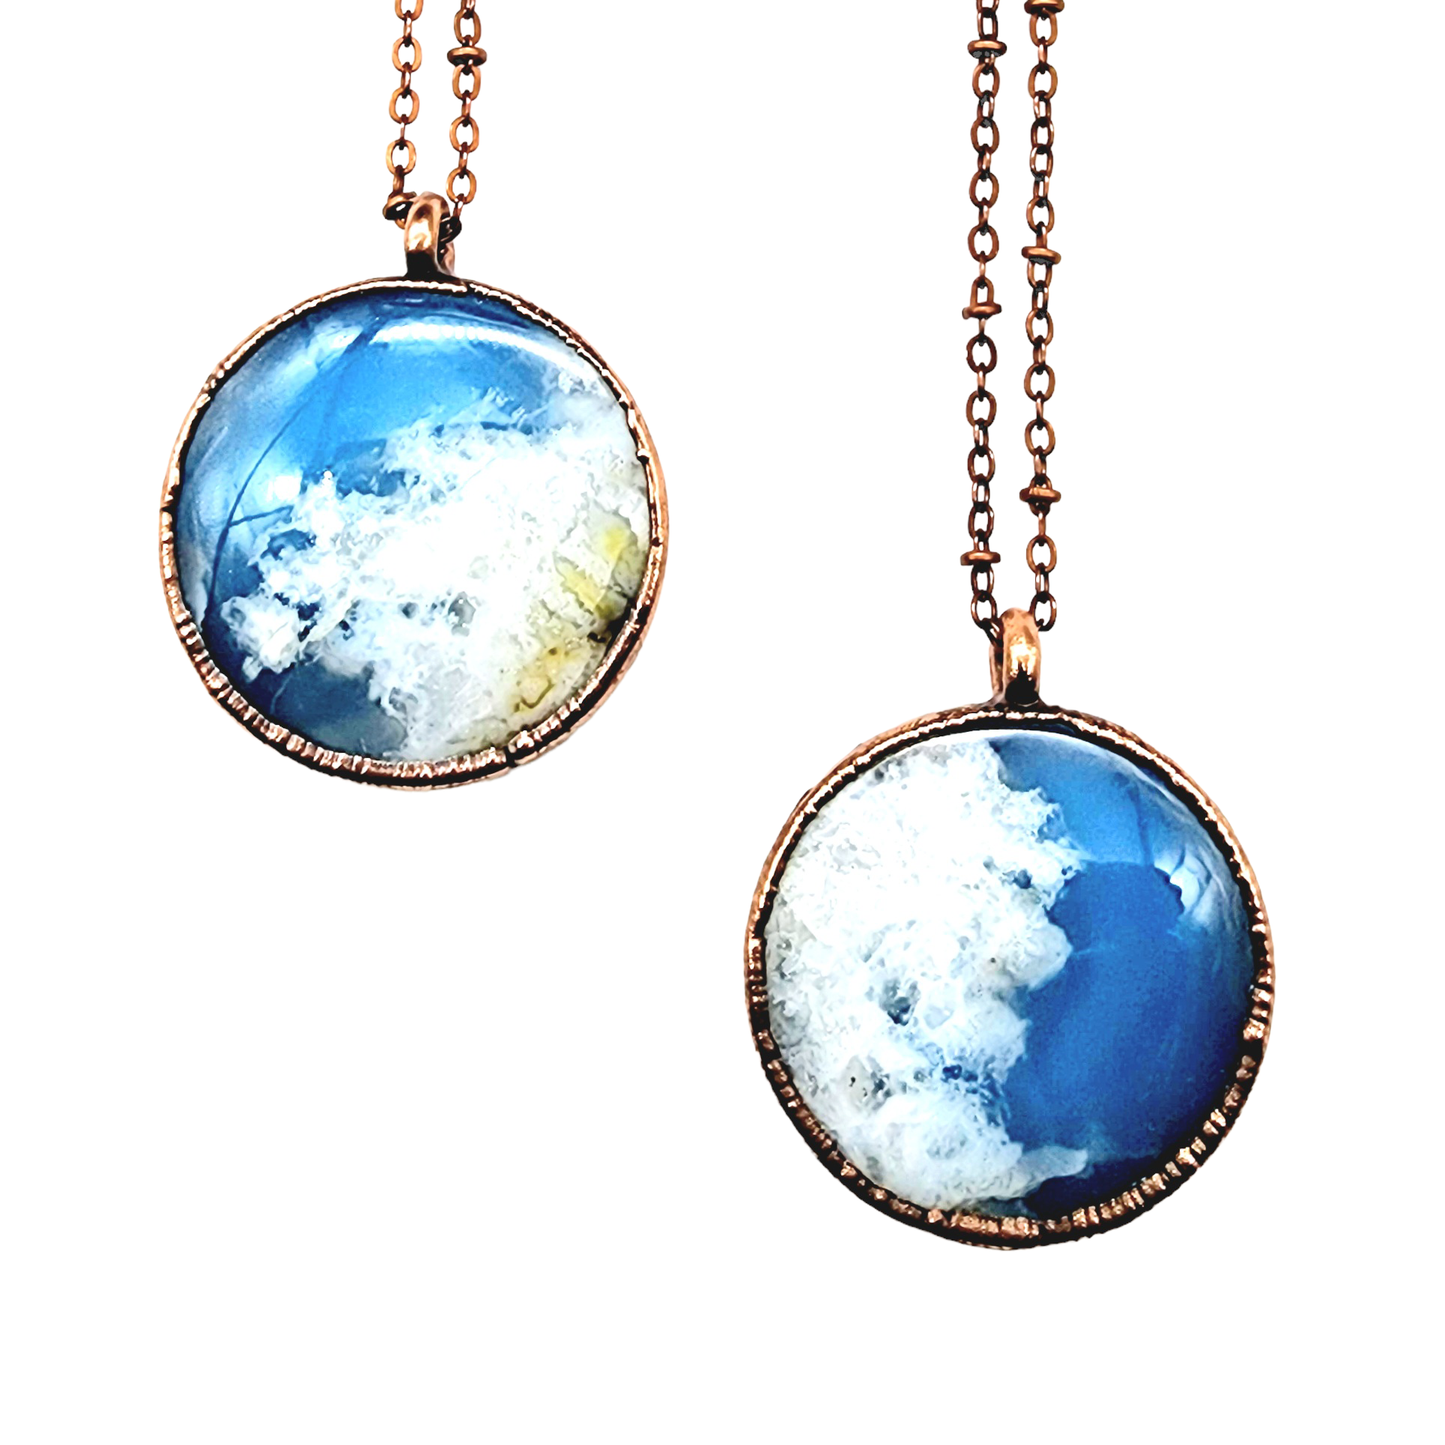 Cloudy Days Flower Agate Necklace